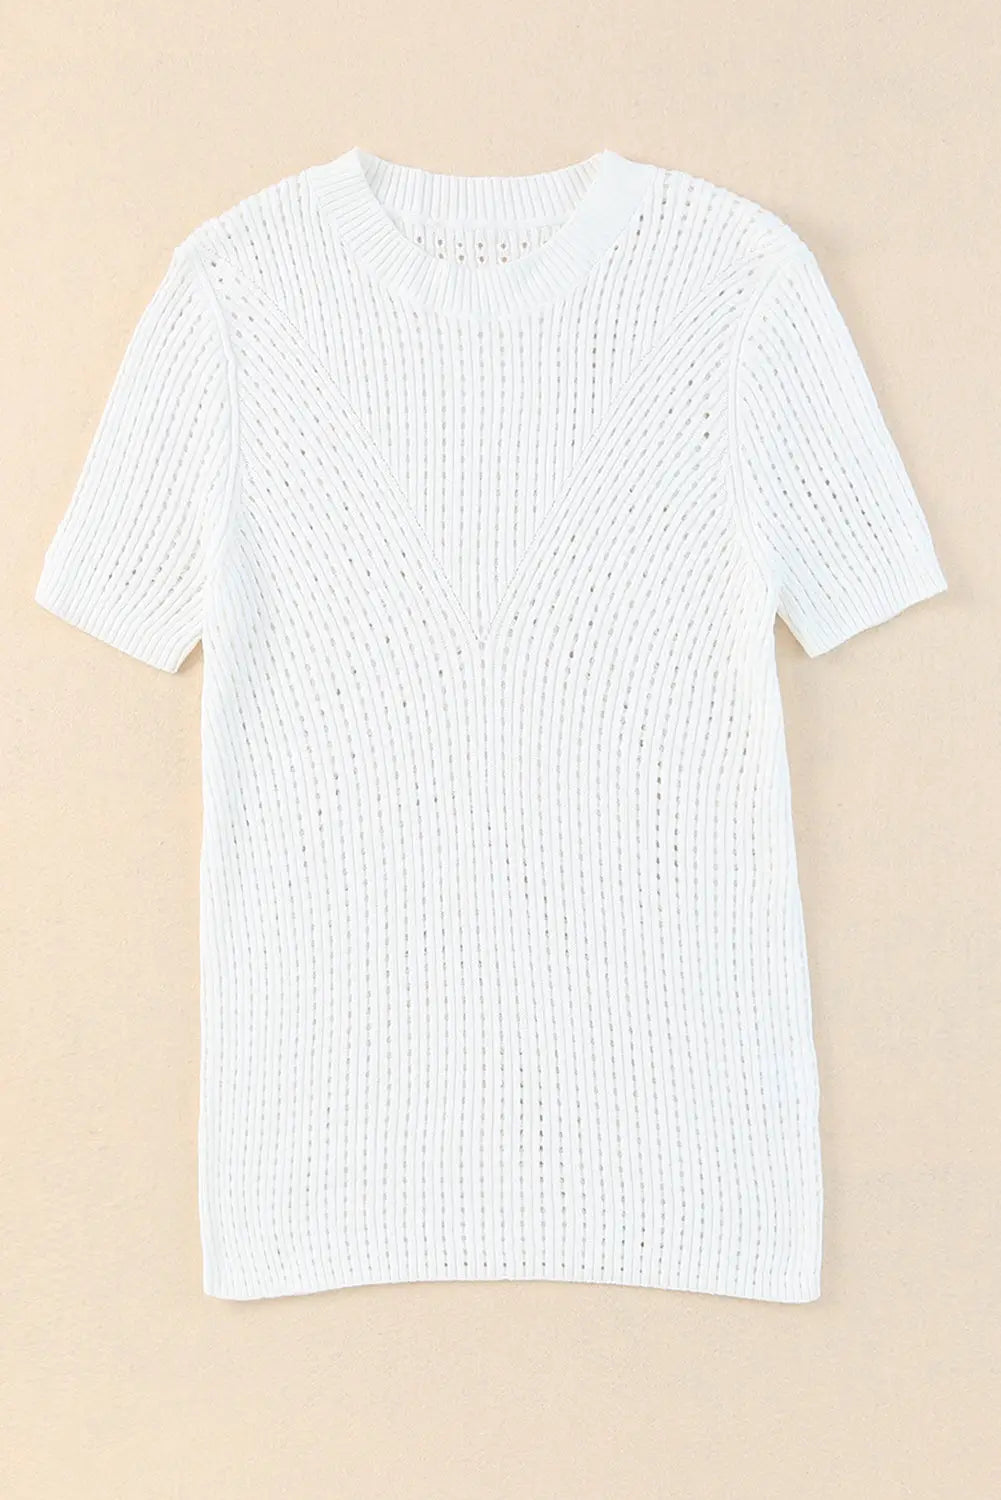 White Hollow-out Knitted Short Sleeve T Shirt-4